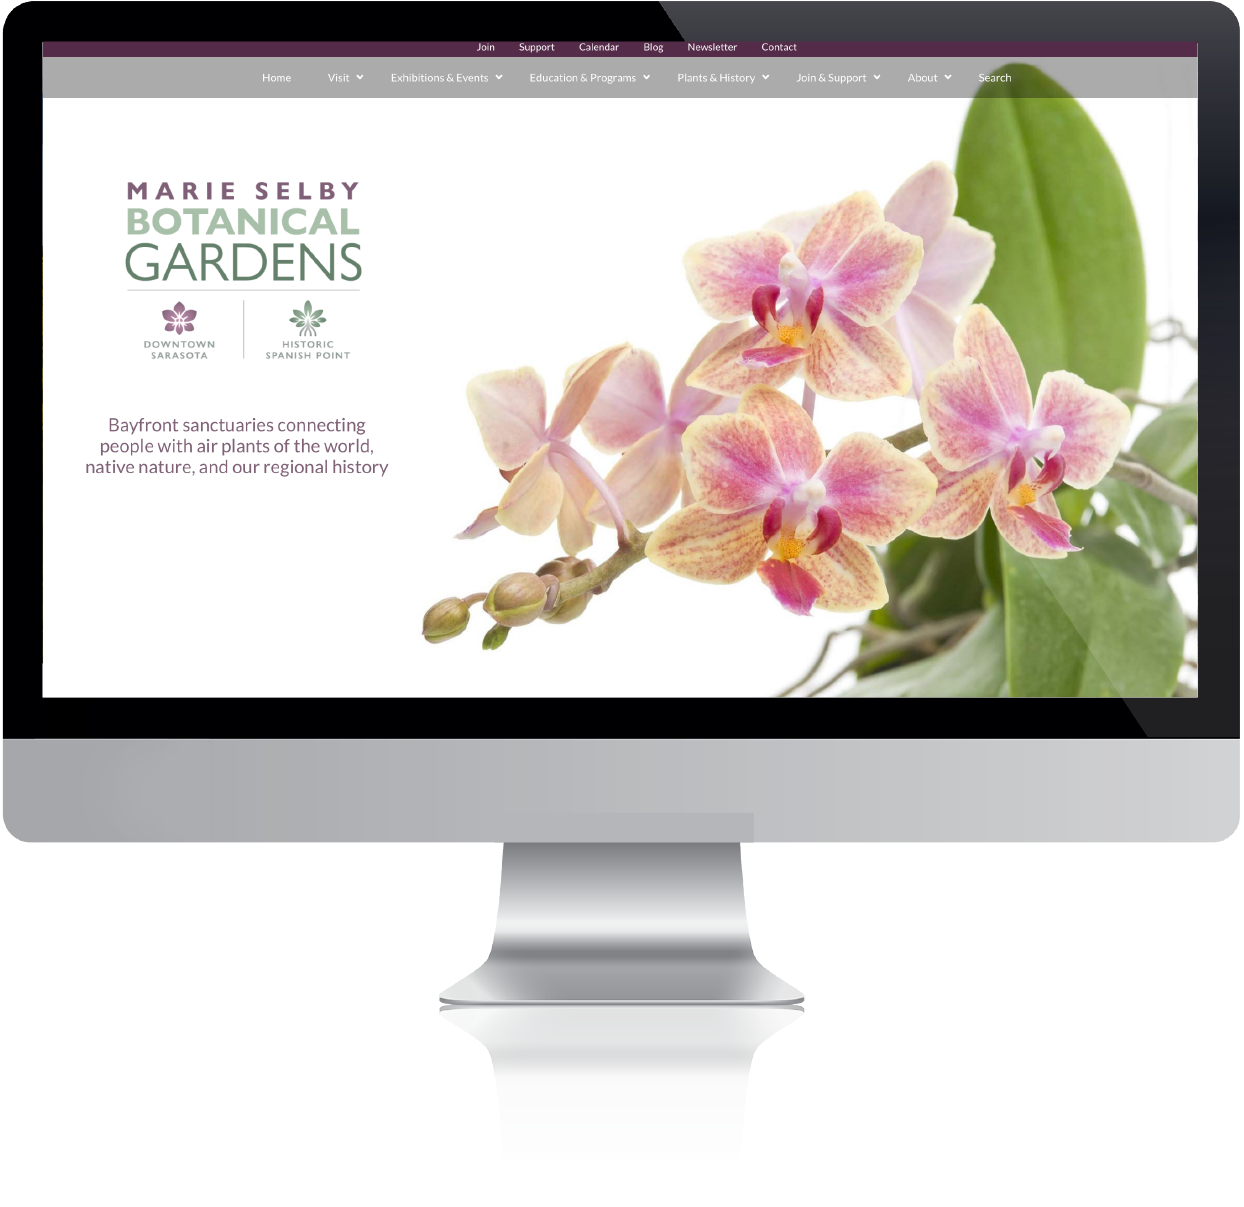 Selby Gardens Website Example